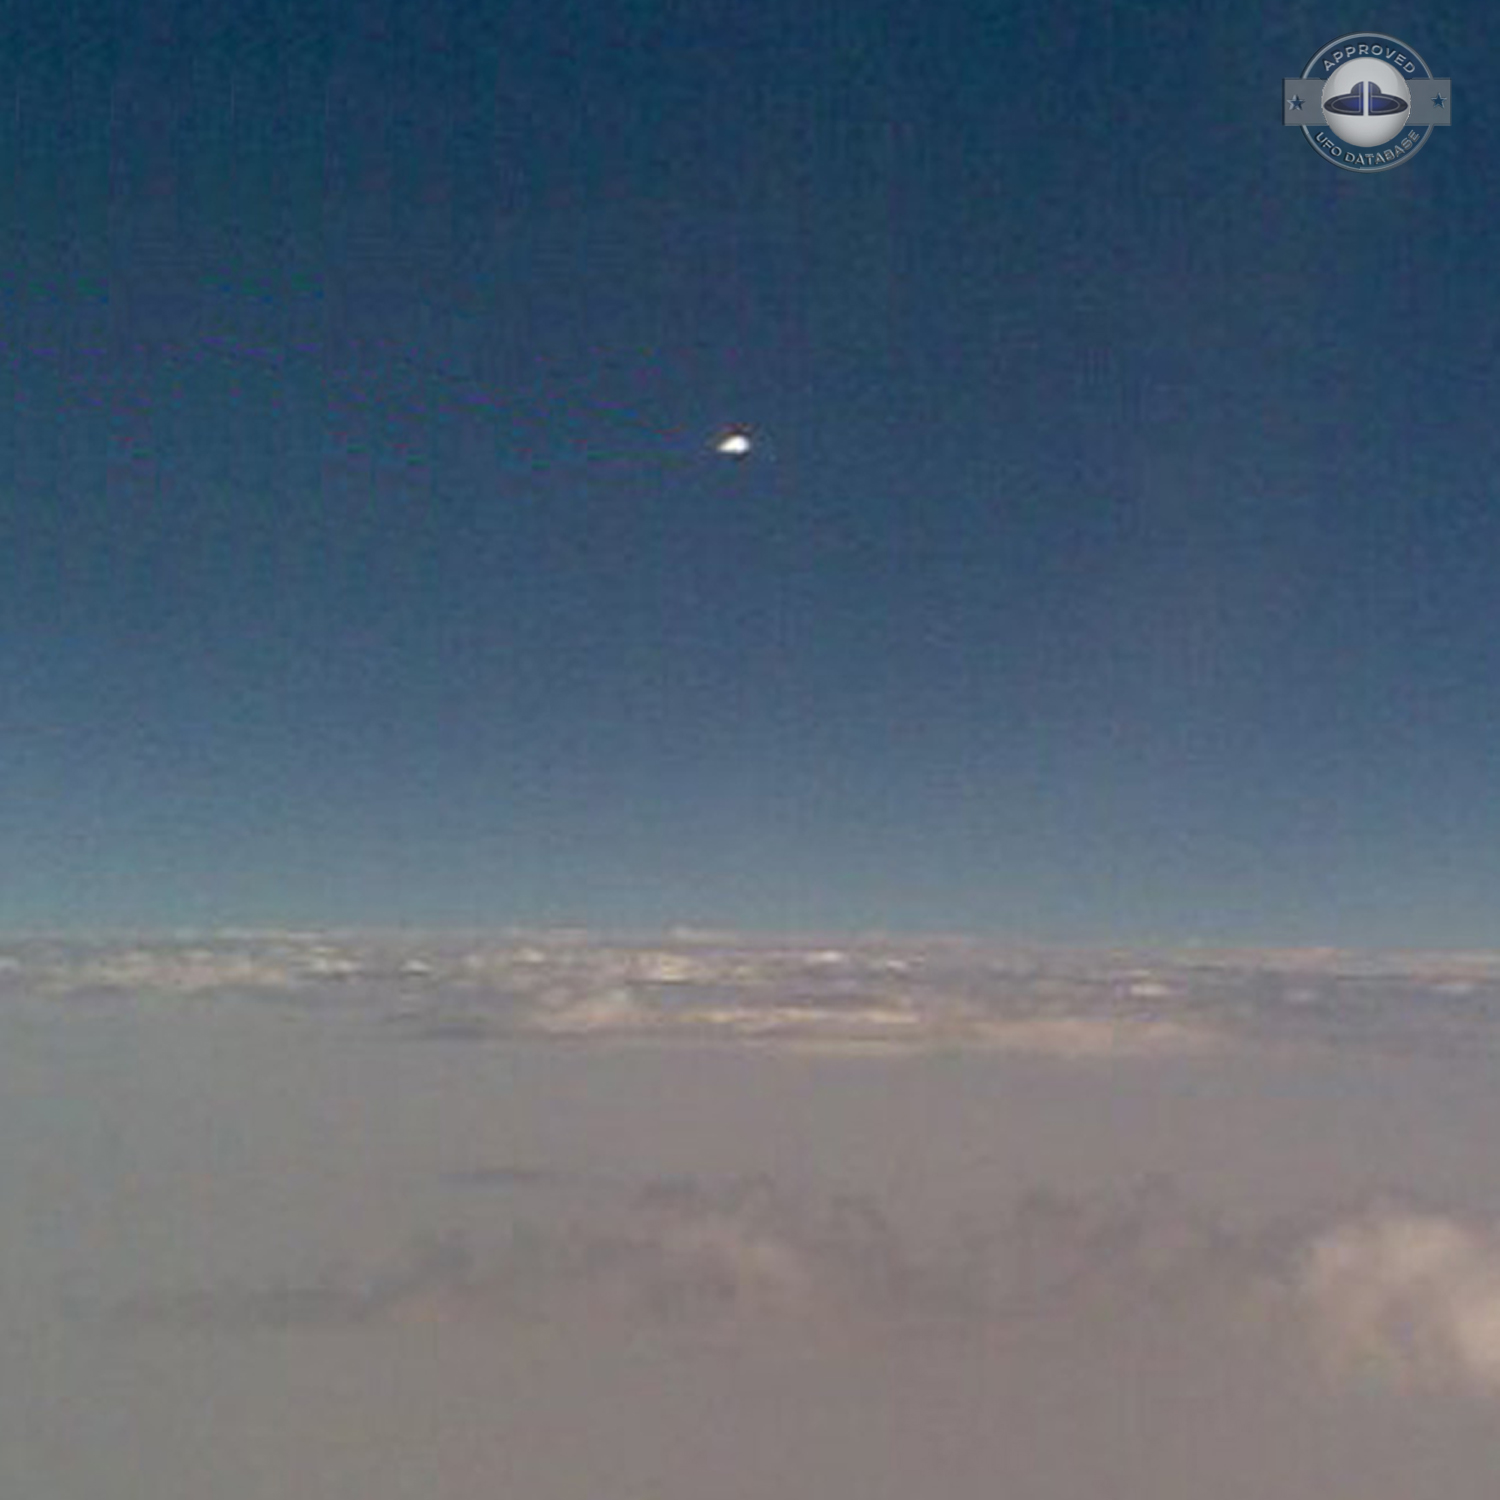 UFO seen over India between New Delhi to Guwahati | UFO picture 2008 UFO Picture #195-3